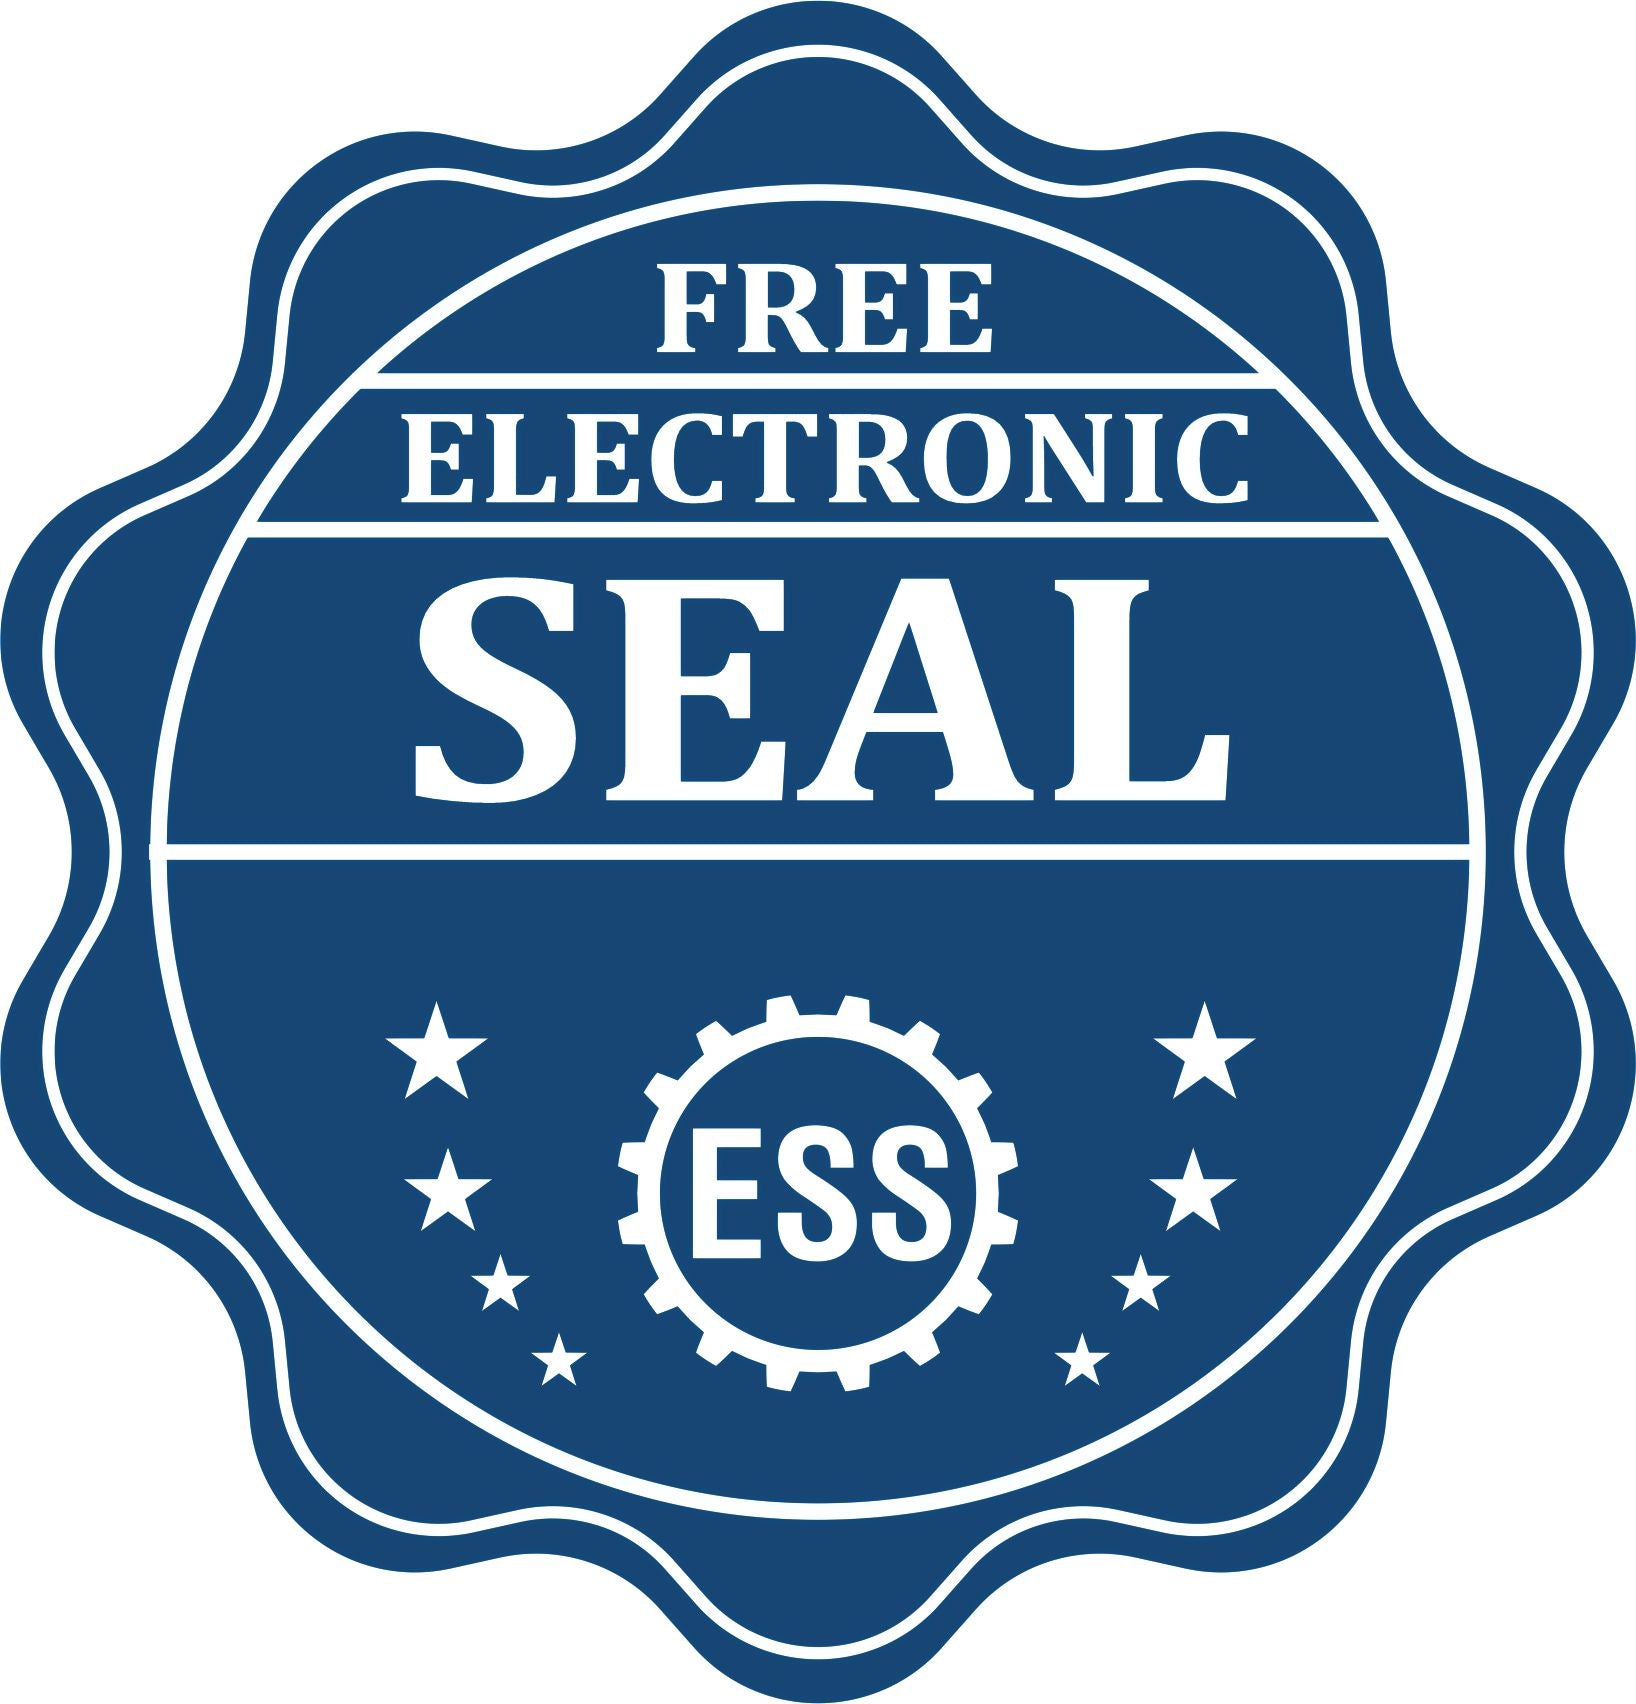 A badge showing a free electronic seal for the Heavy-Duty North Dakota Rectangular Notary Stamp with stars and the ESS gear on the emblem.